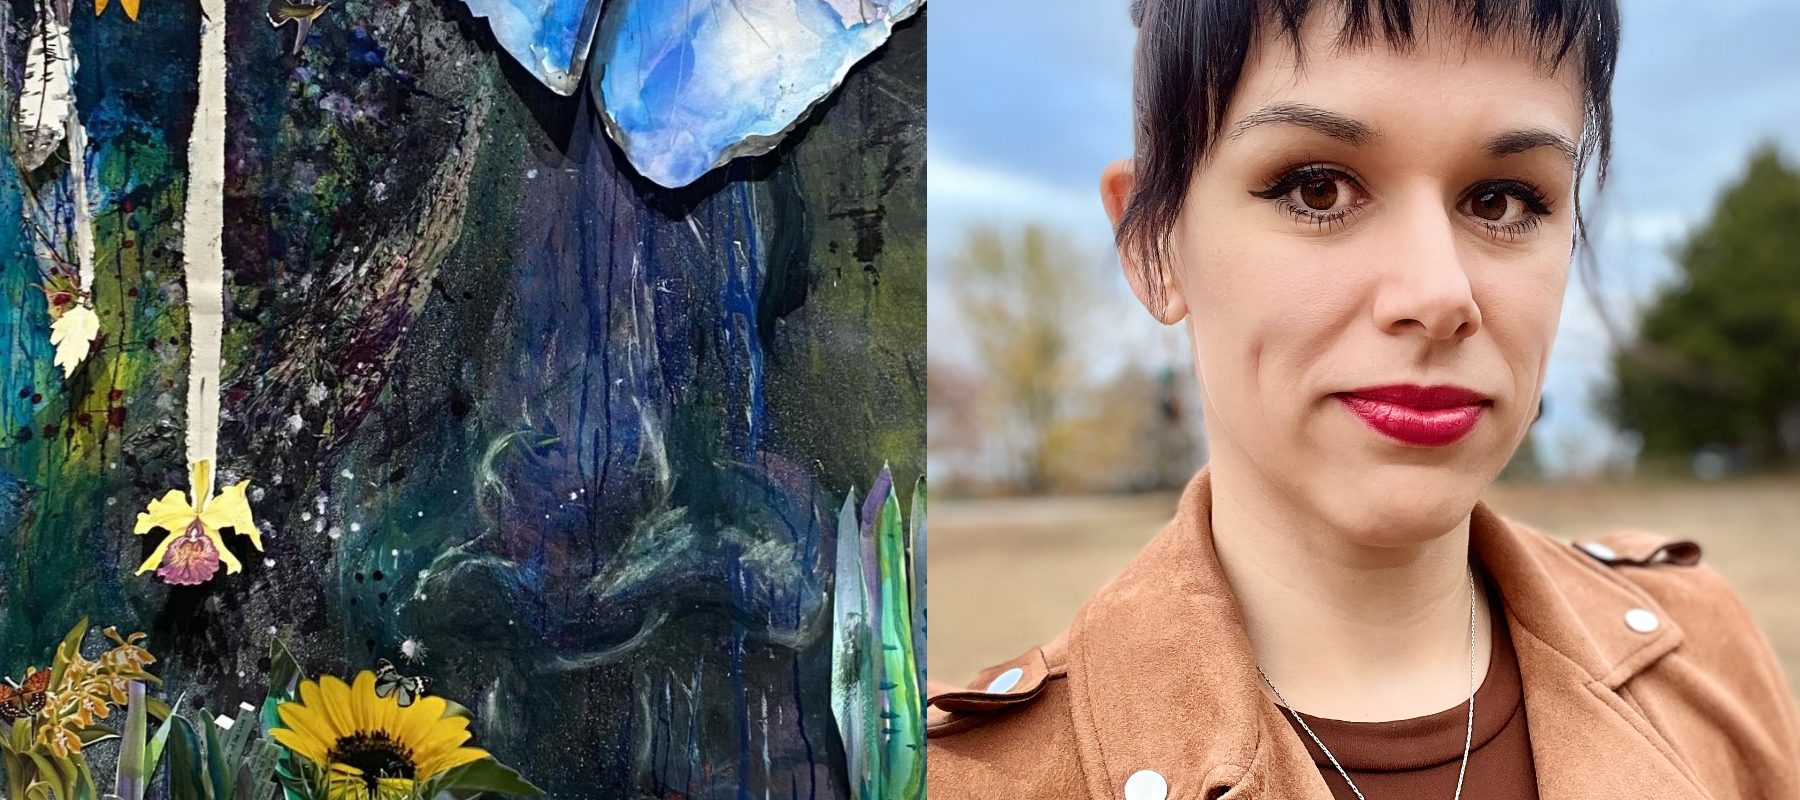 At left, art by Lori Santos, Mother Tongue (detail), 2022; mixed media, paper, watercolors, colored pencil, collage. Courtesy of the artist. On the right is a photo of Tatiana Larsen